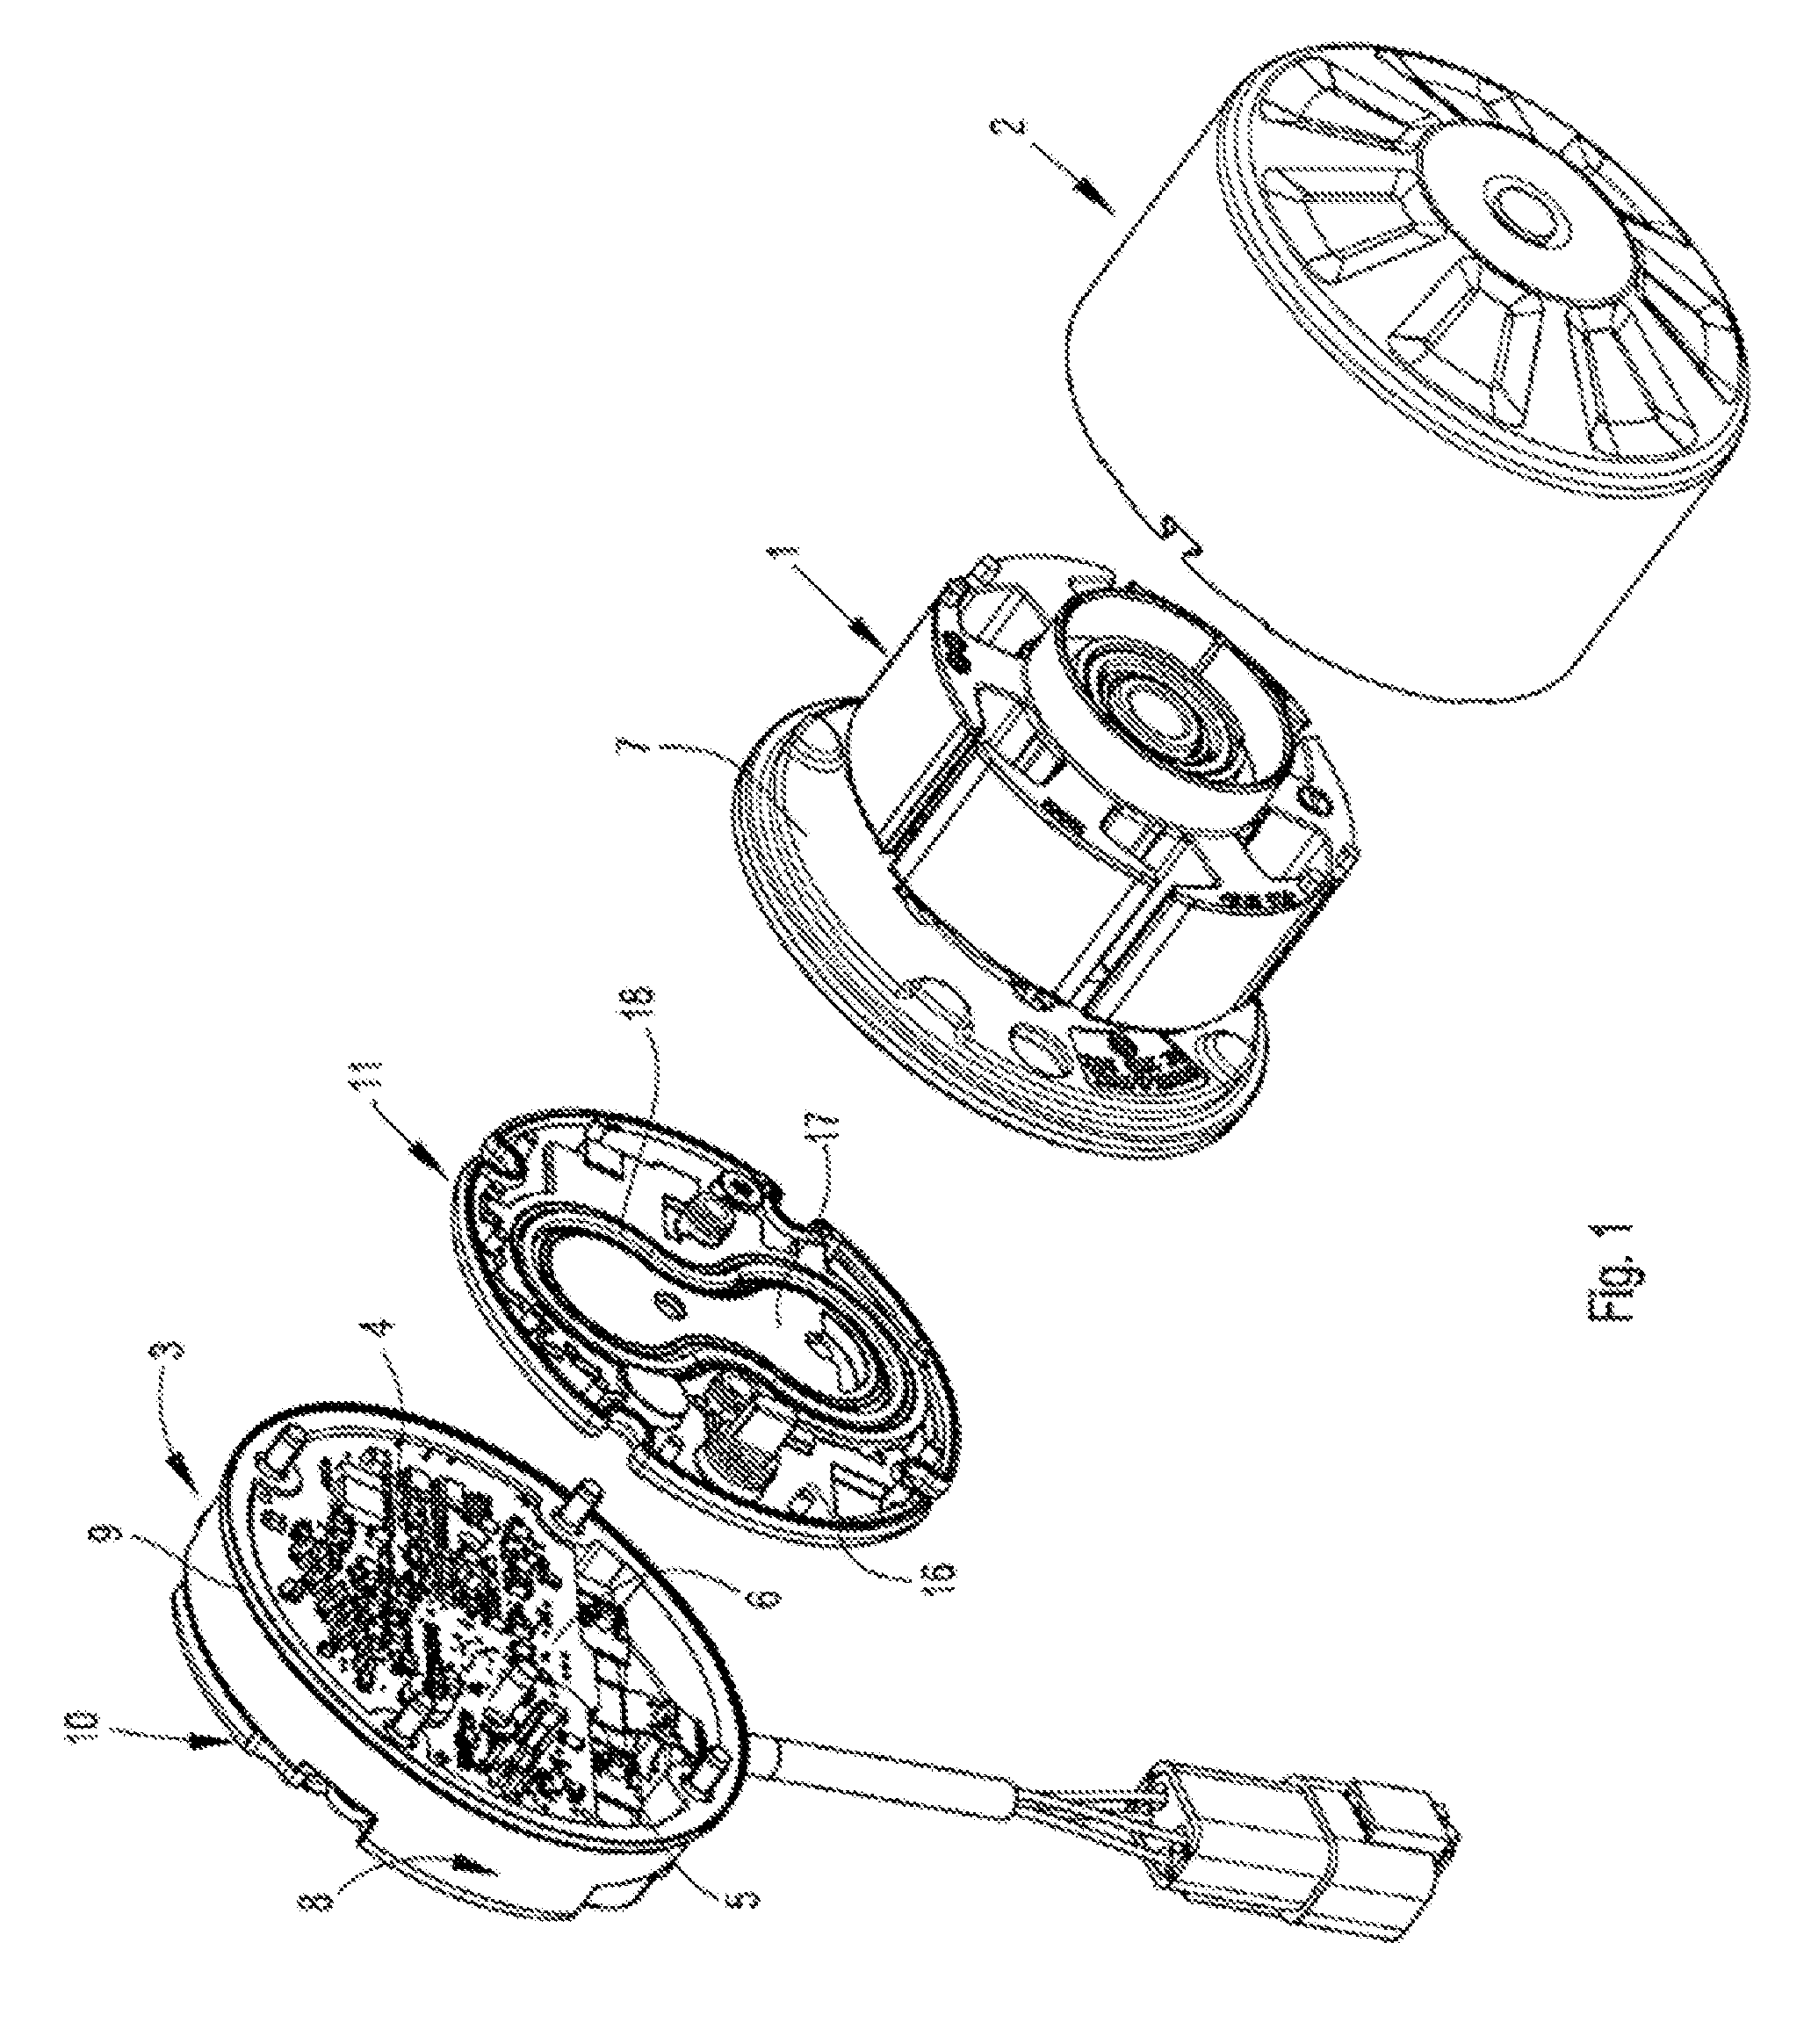 Housing for accommodating an electronic circuit